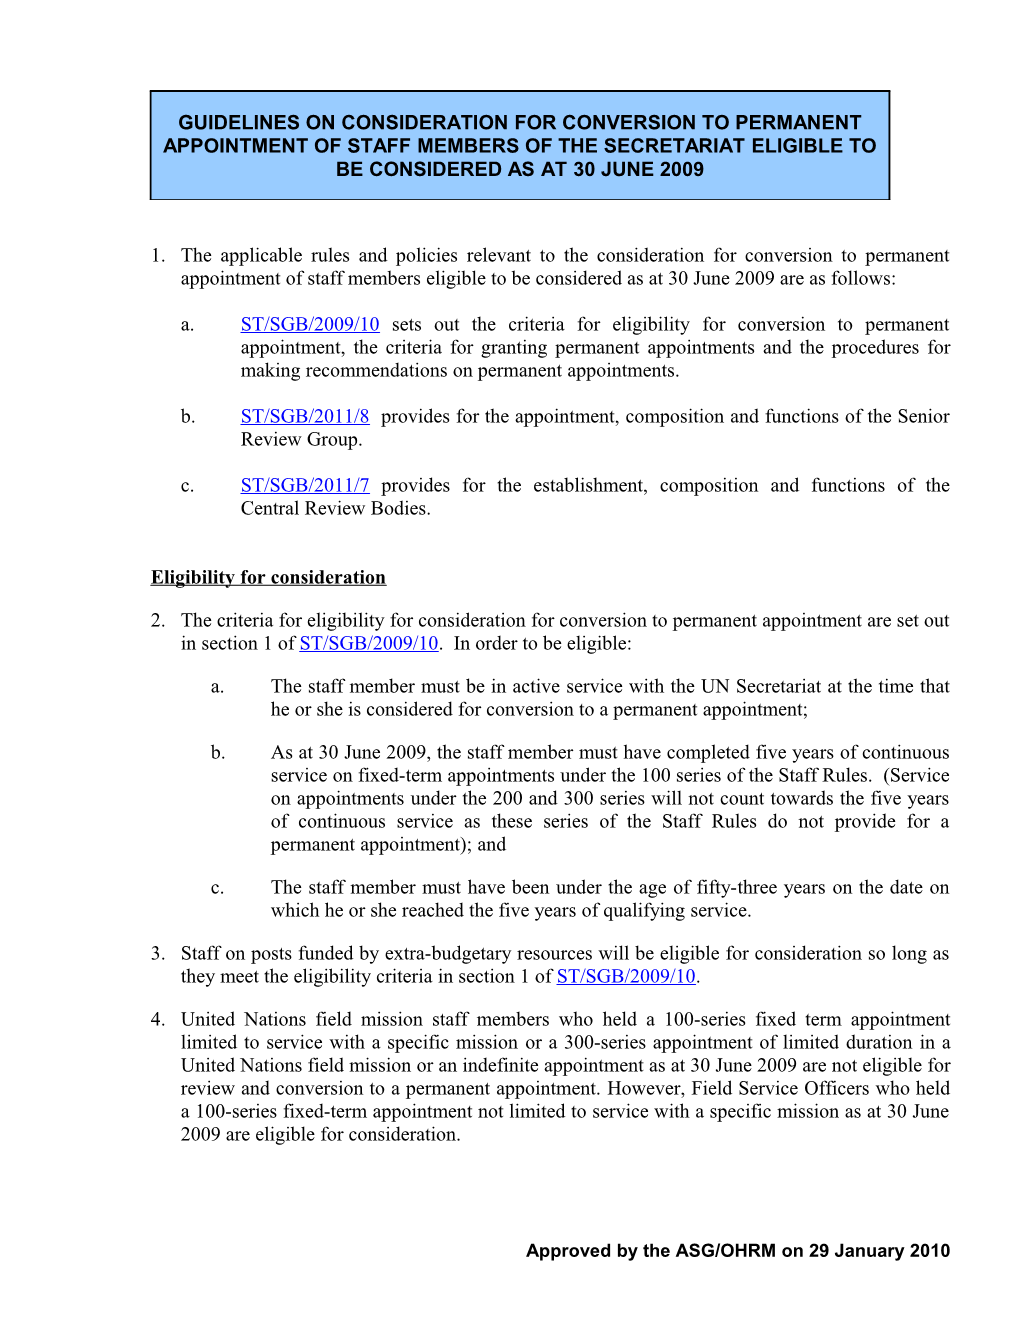 A. ST/SGB/2009/10 Sets out the Criteria for Eligibility for Conversion to Permanent Appointment